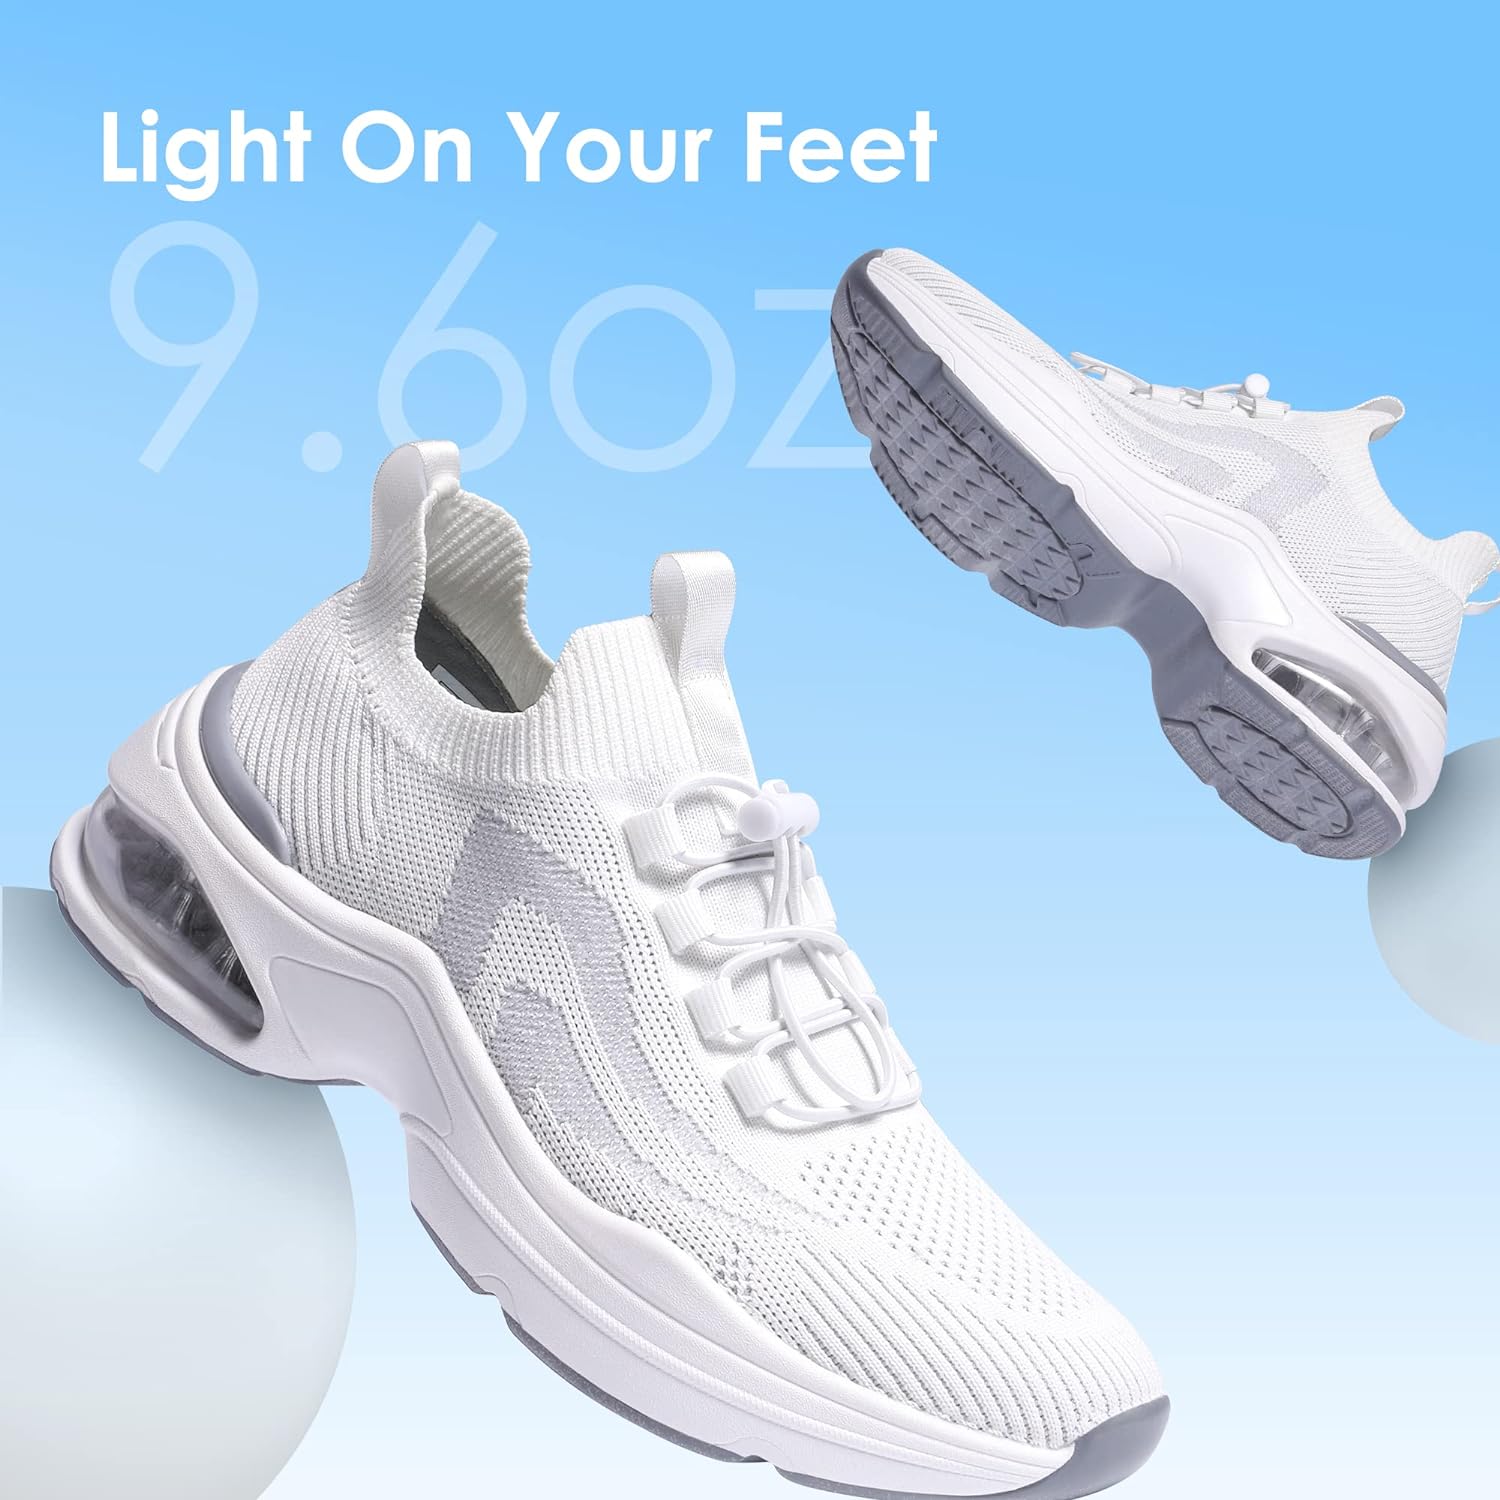 DREAM PAIRS Womens Walking Sneakers, Slip-on Air Cushion Slip Resistant Tennis Casual Gym Workout Chas Nurse Restaurant Work Shoes